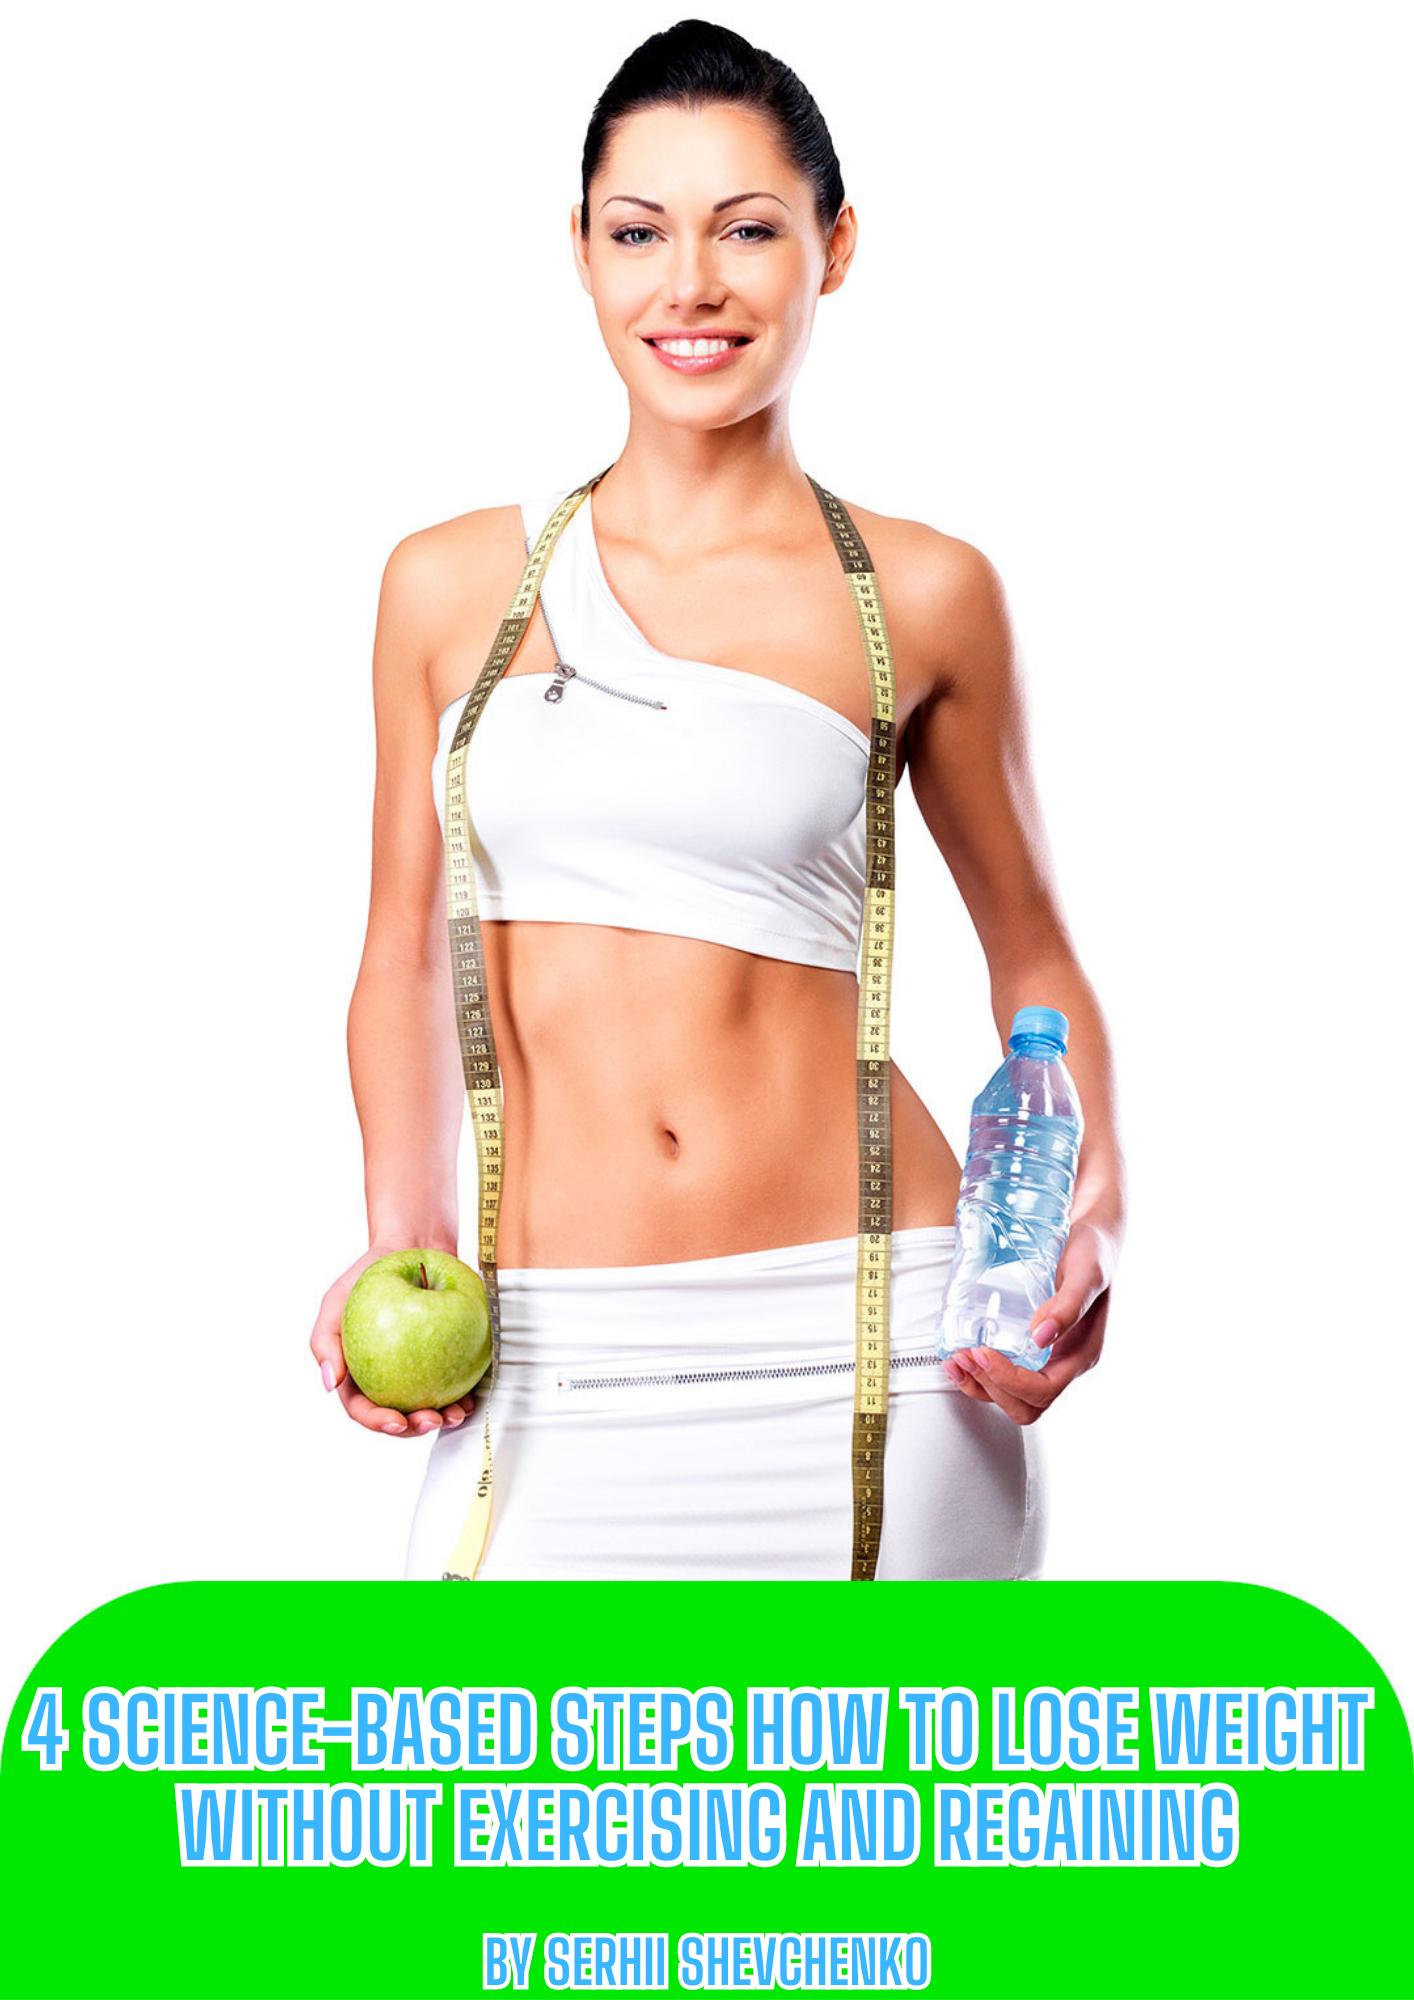 4-science-based-steps-to-lose-weight-without-exercising-regaining